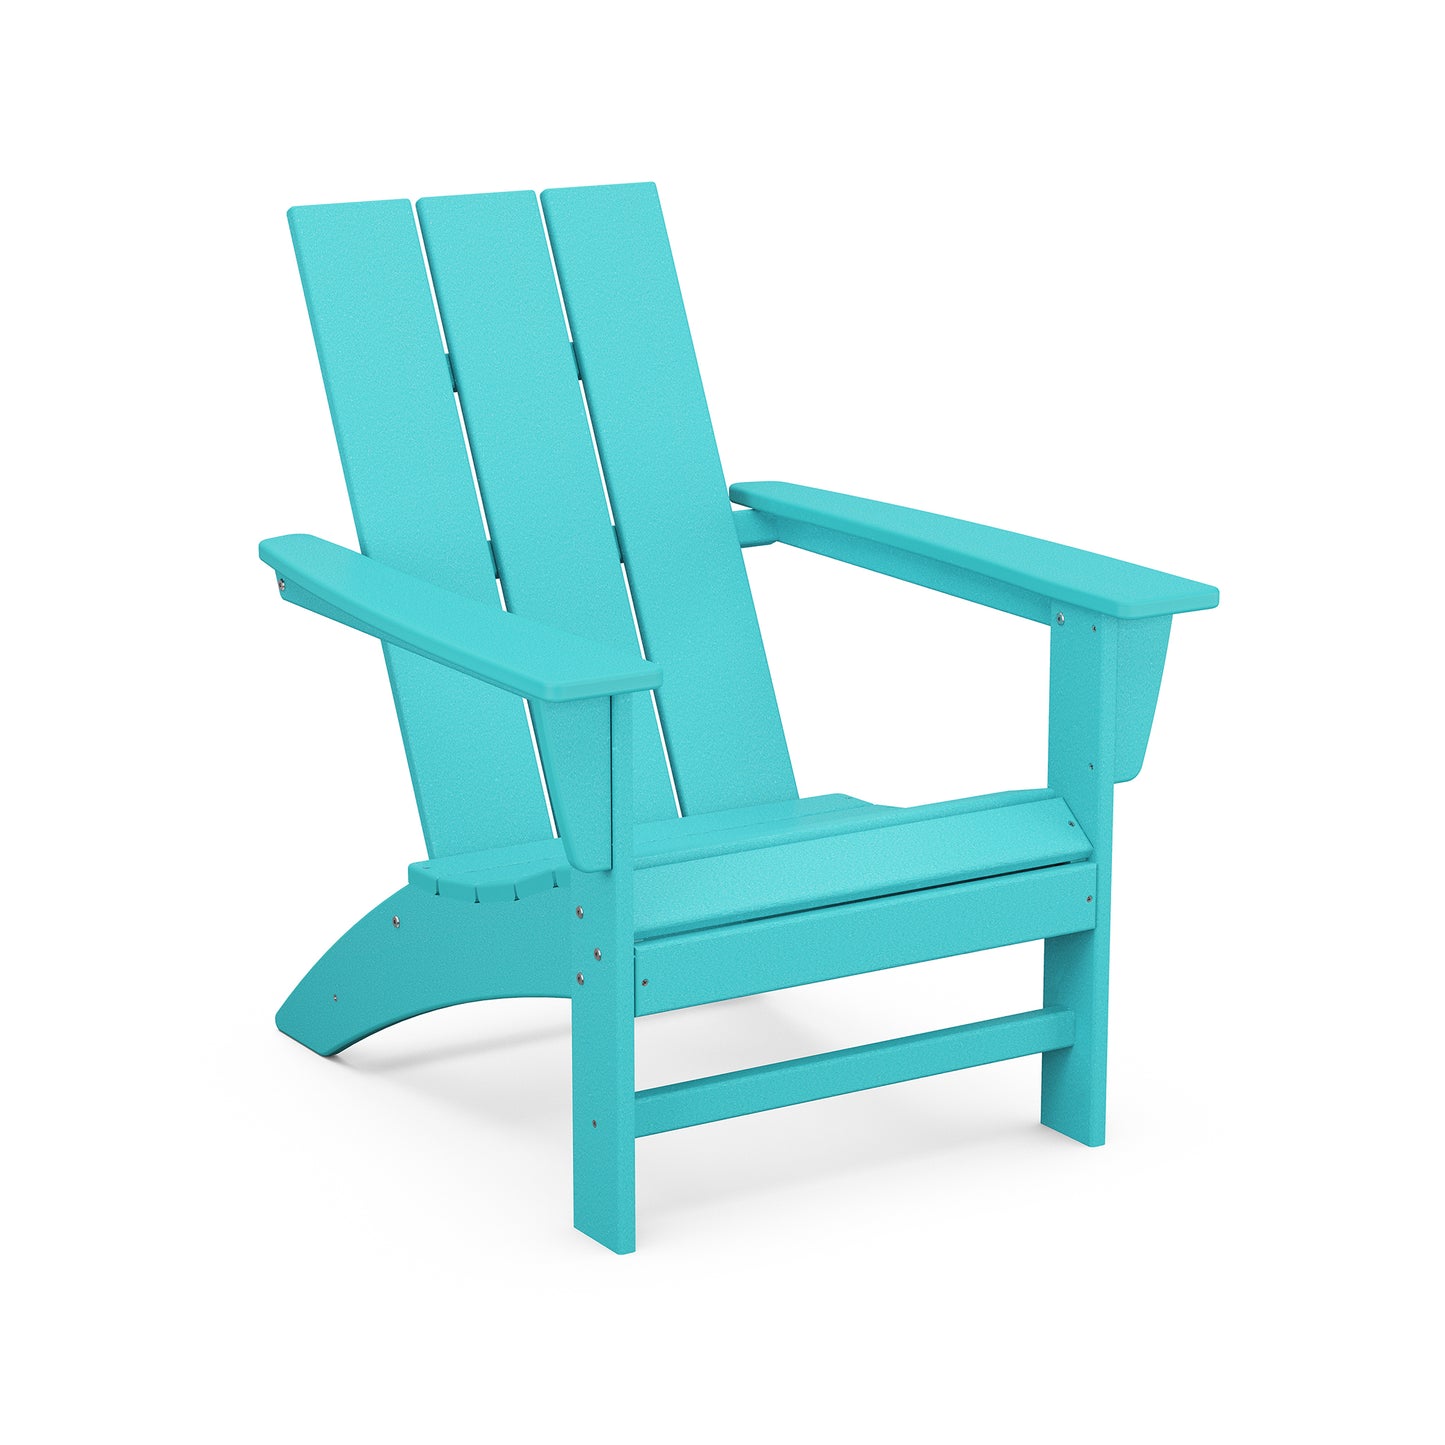 A vibrant turquoise POLYWOOD Modern Adirondack chair isolated on a white background, featuring a slatted back and seat with wide armrests.